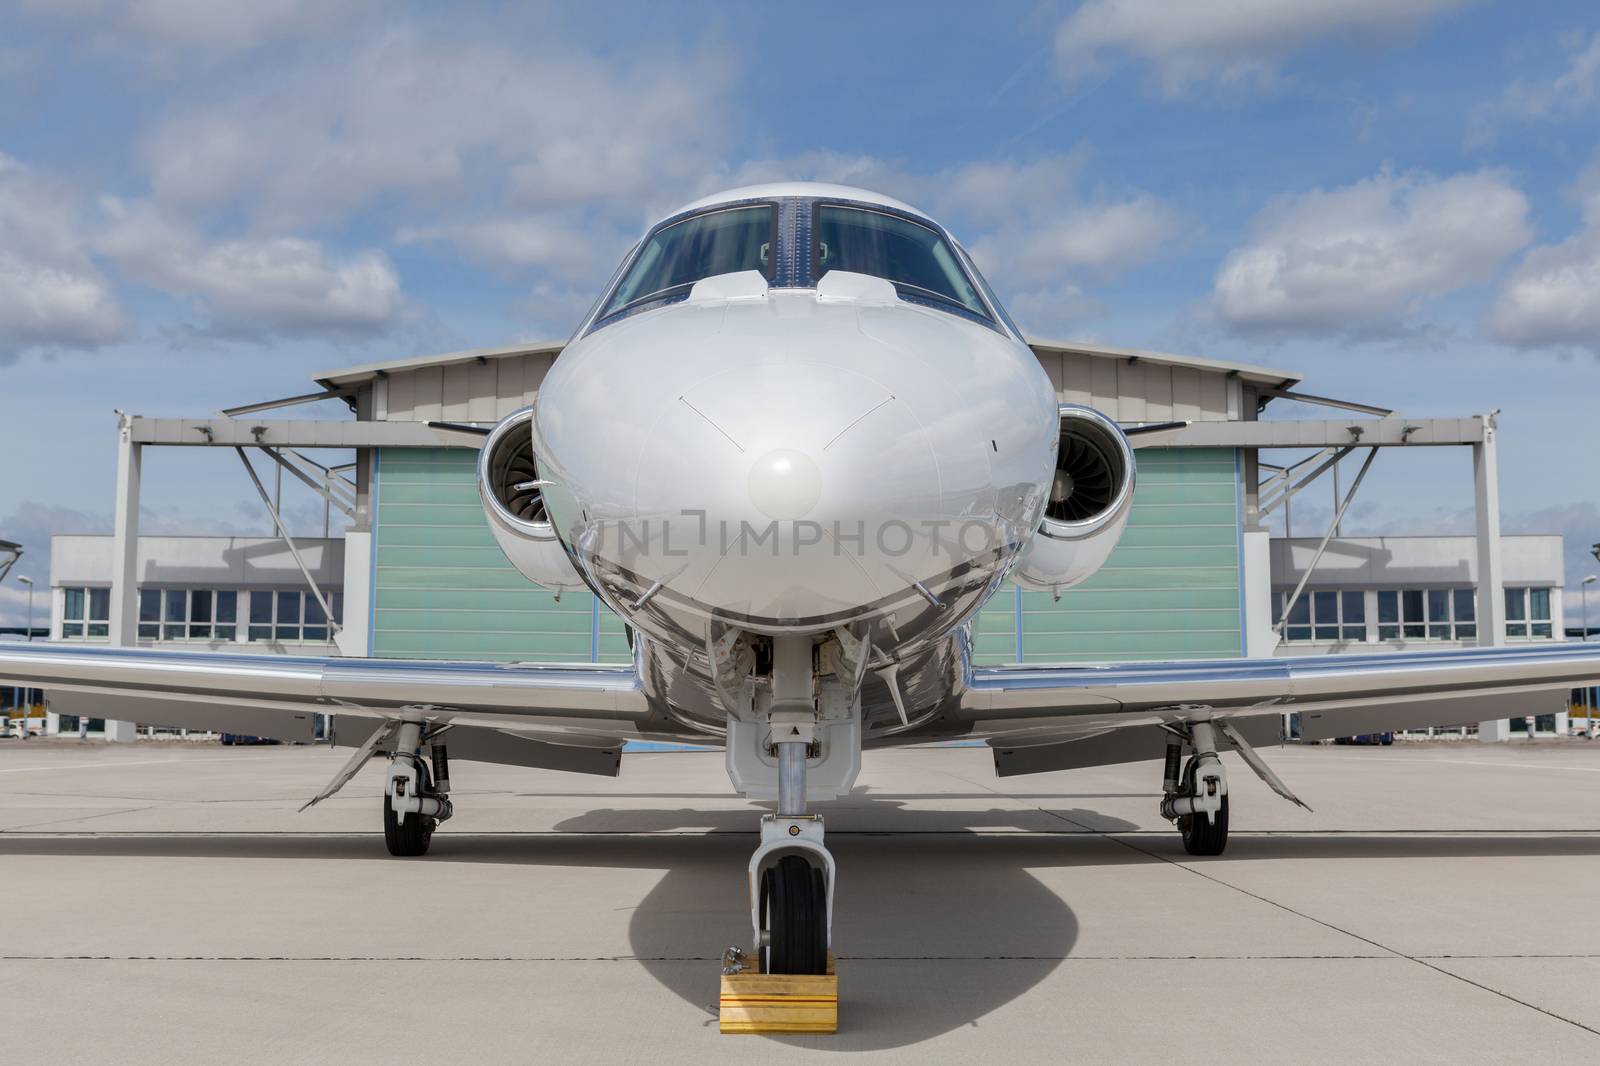 Aircraft learjet Plane in front of the Airport with cloudy sky by juniart